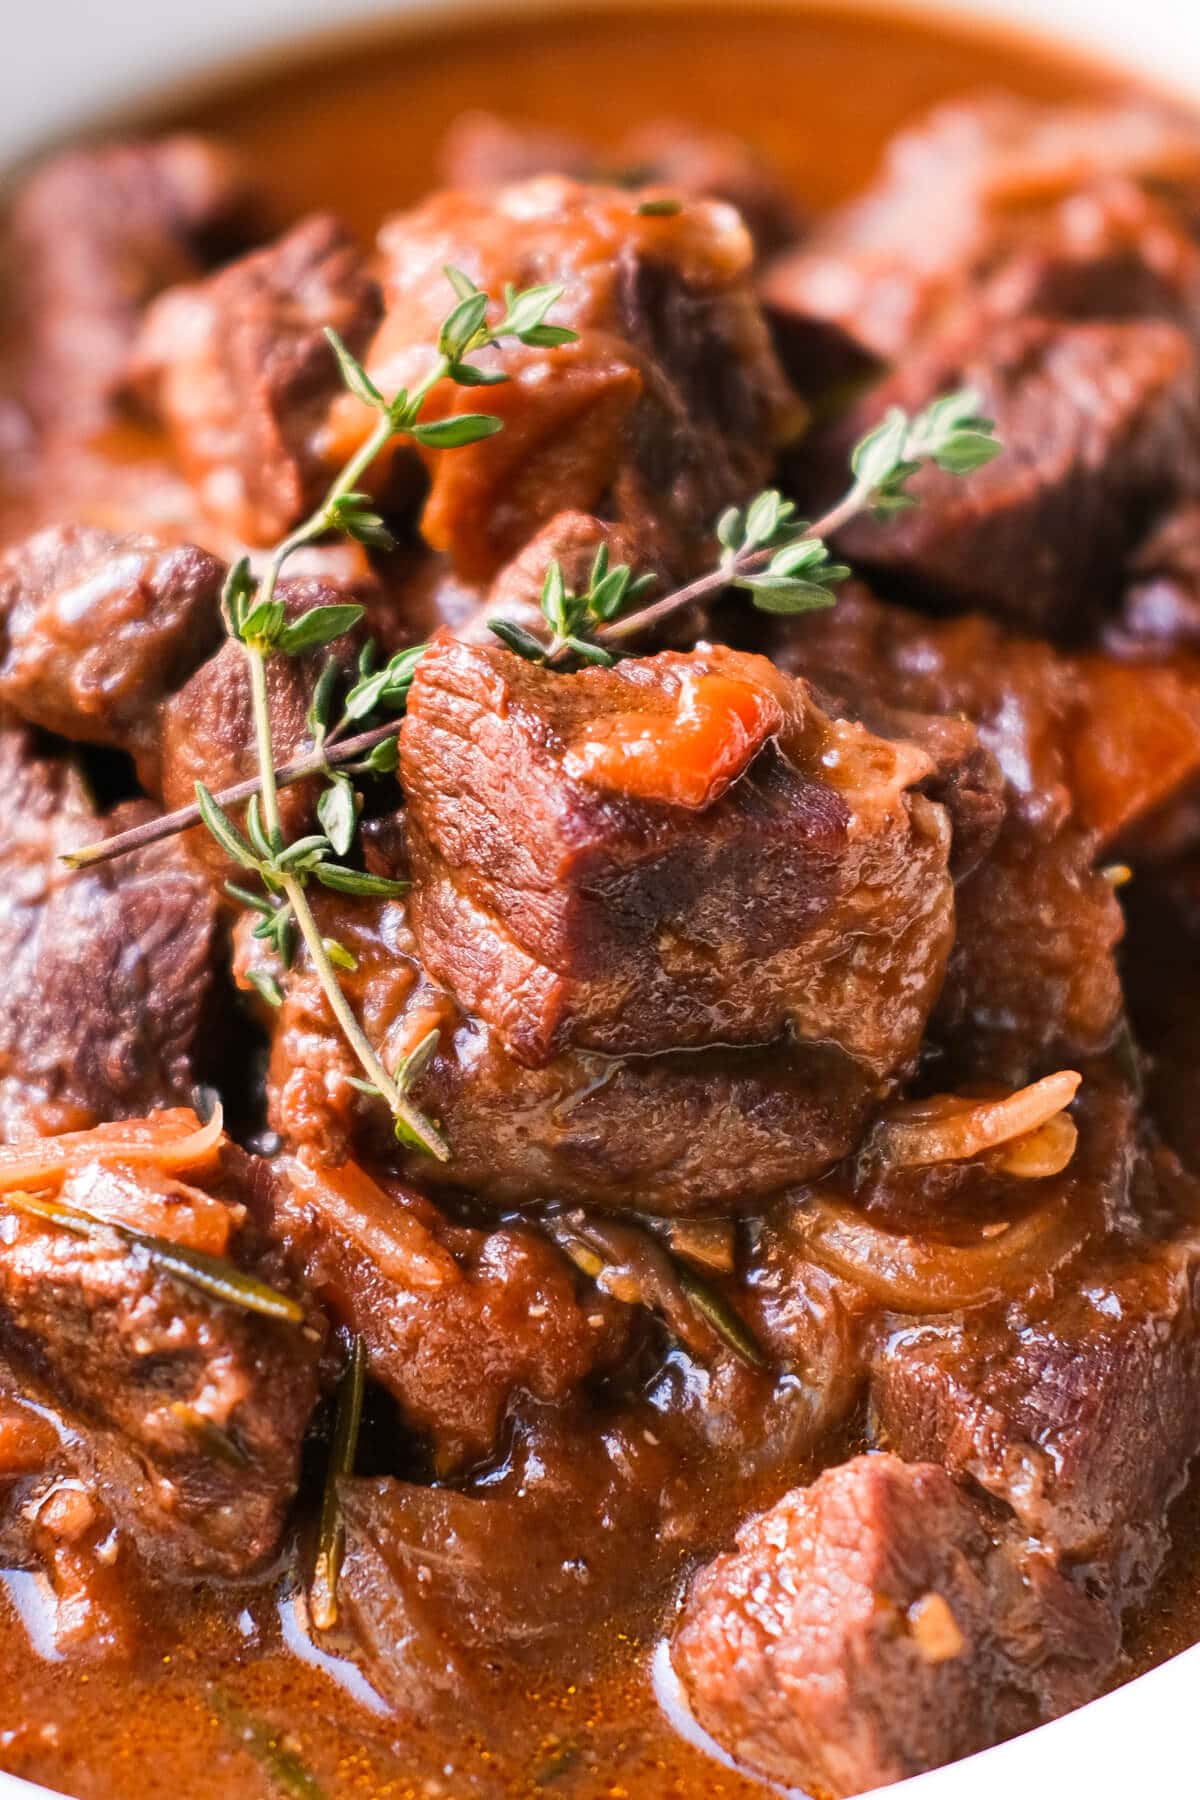 Tender, juicy braised beef soaked in tomato sauce and topped with fresh thyme.